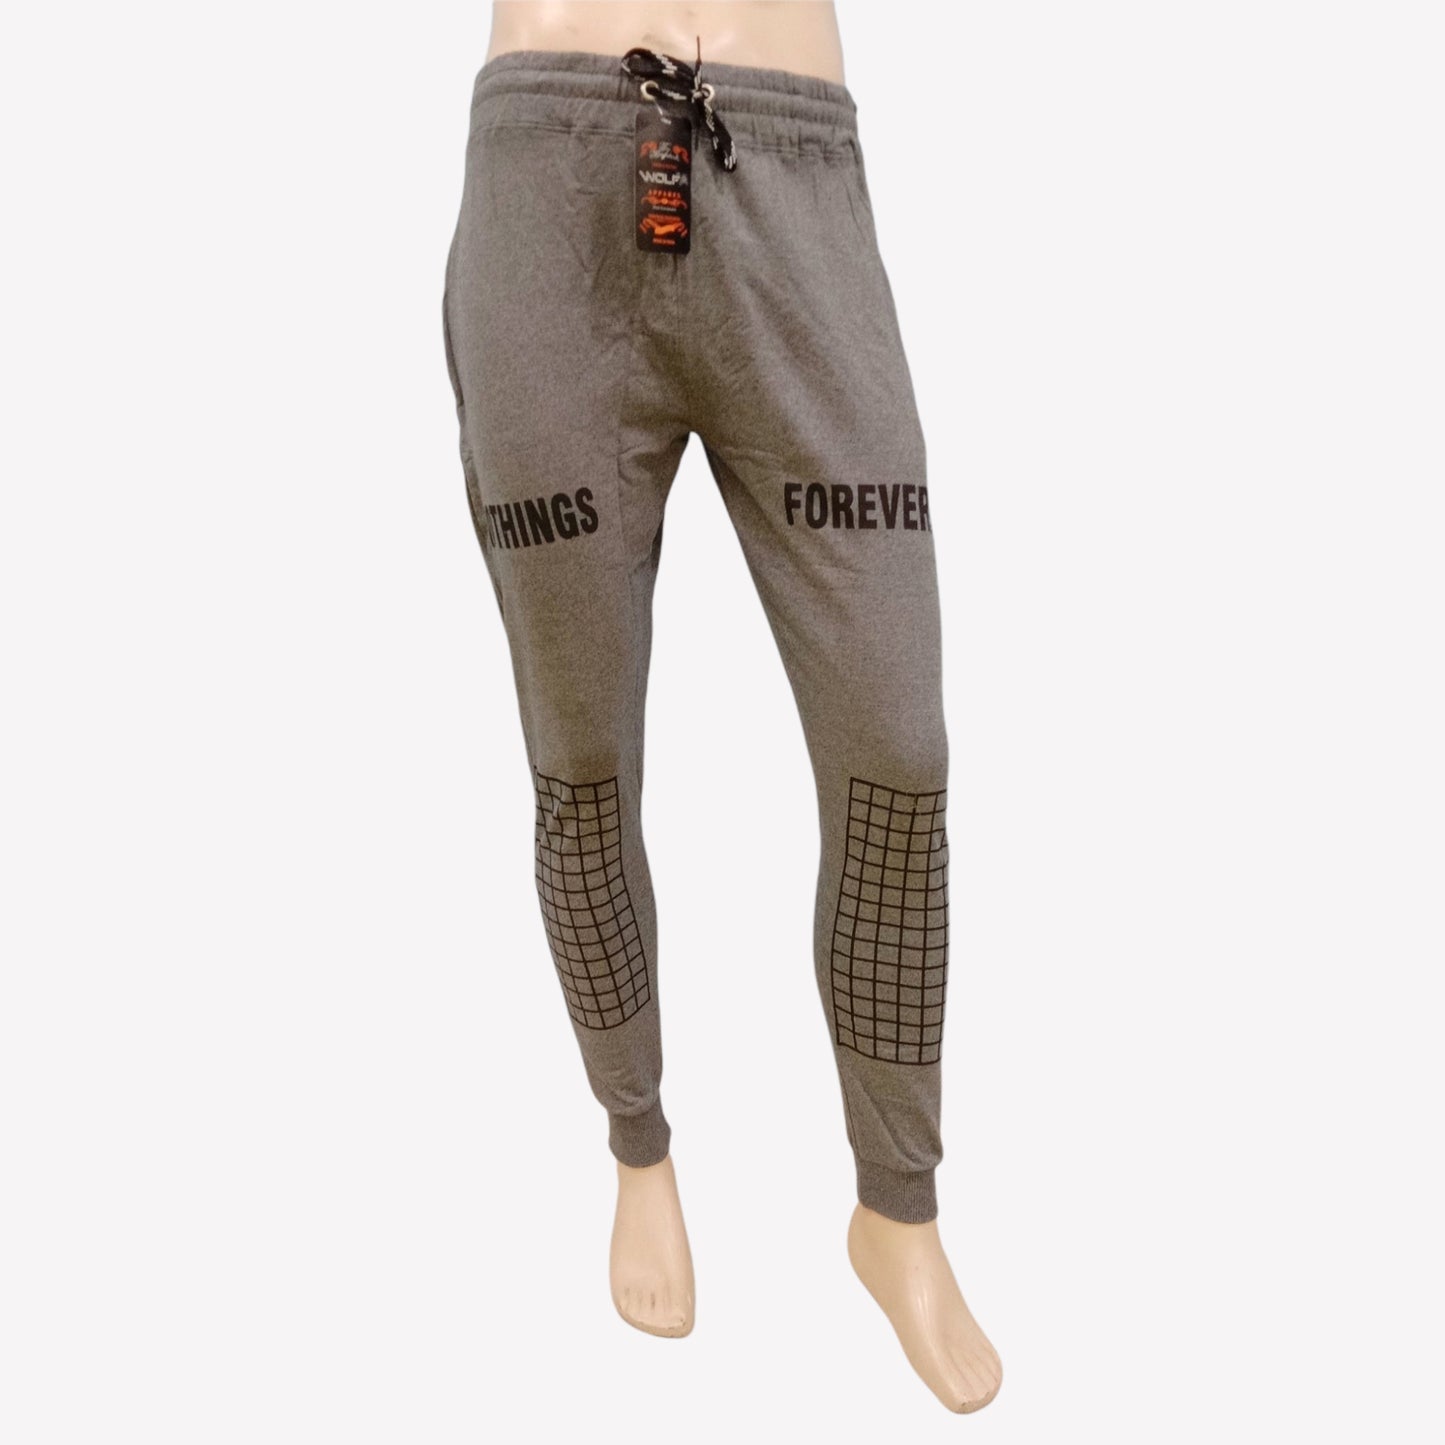 Branded Checked Printed Night Pant/Track Suit Jogger Model for men L to 2XL sizes 3 Colours P2